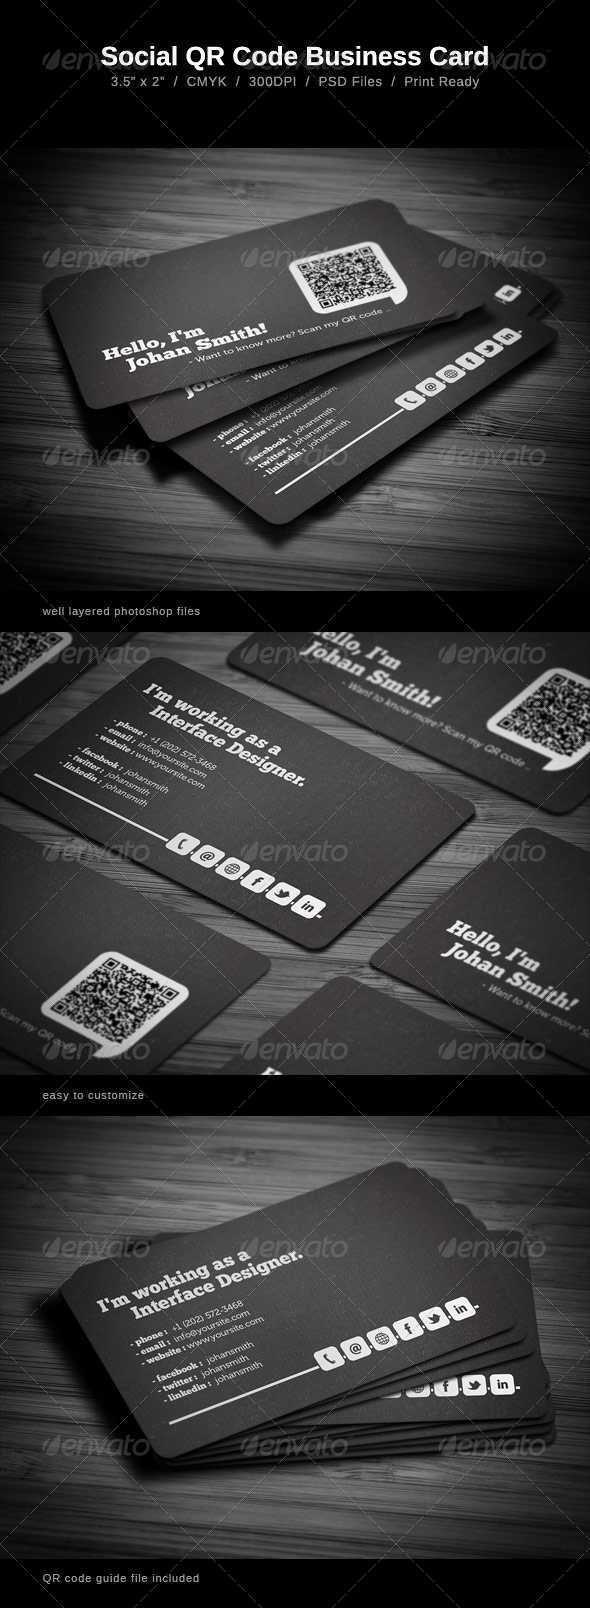 8 Noteworthy Back Of Business Cards Ideas (Design + Marketing) In Business Cards For Teachers Templates Free